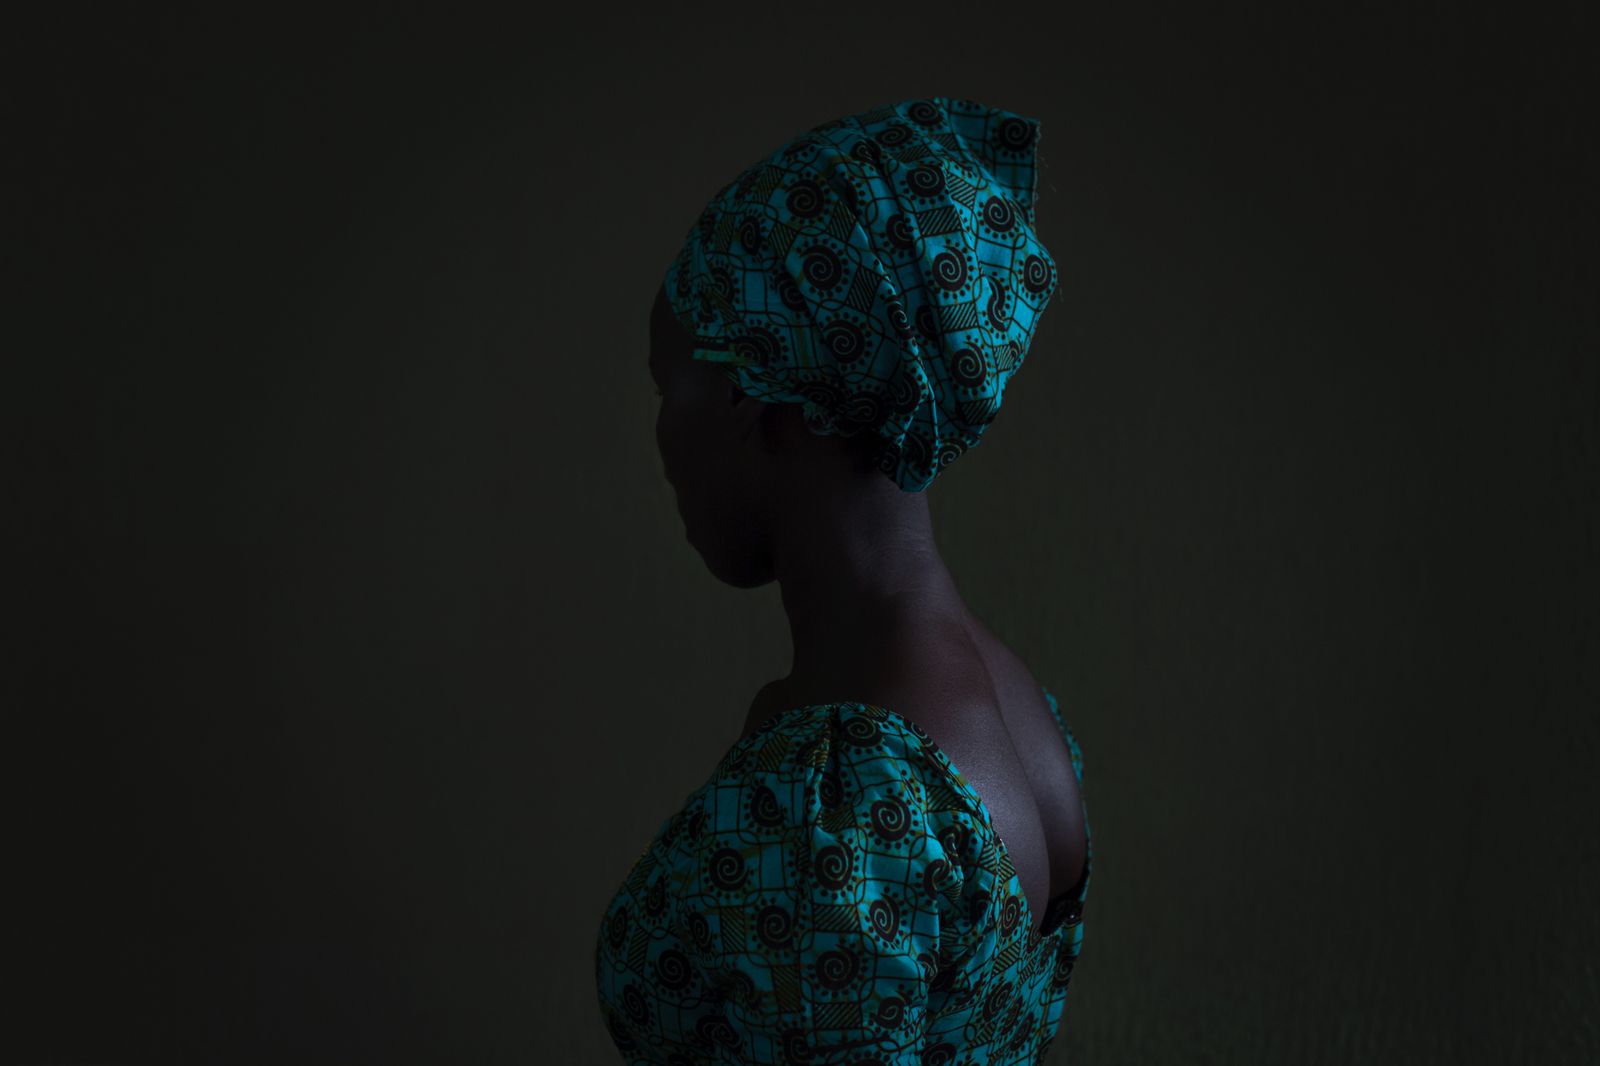 © Ruth McDowall - Image from the Malaiku - Survivors of boko haram abduction photography project